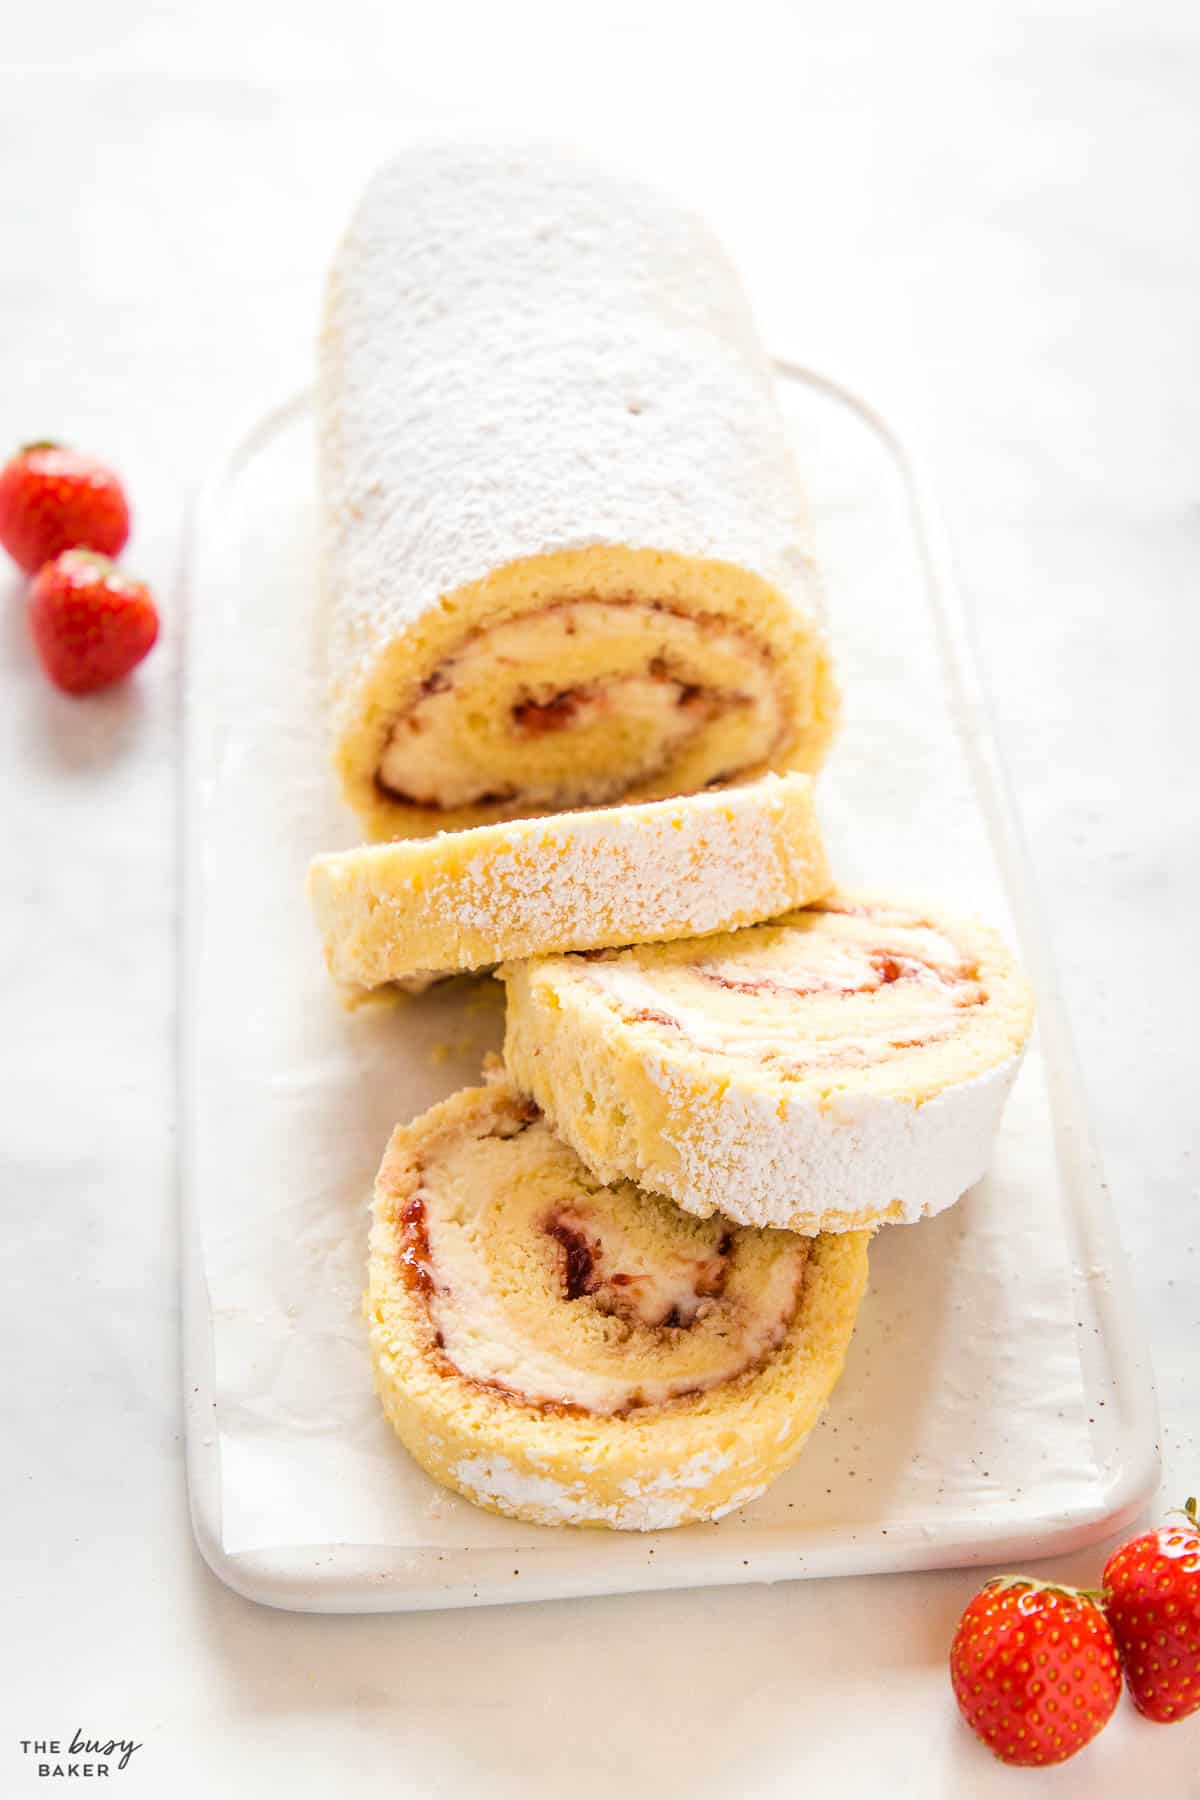 swiss roll cake with strawberry jam and cream